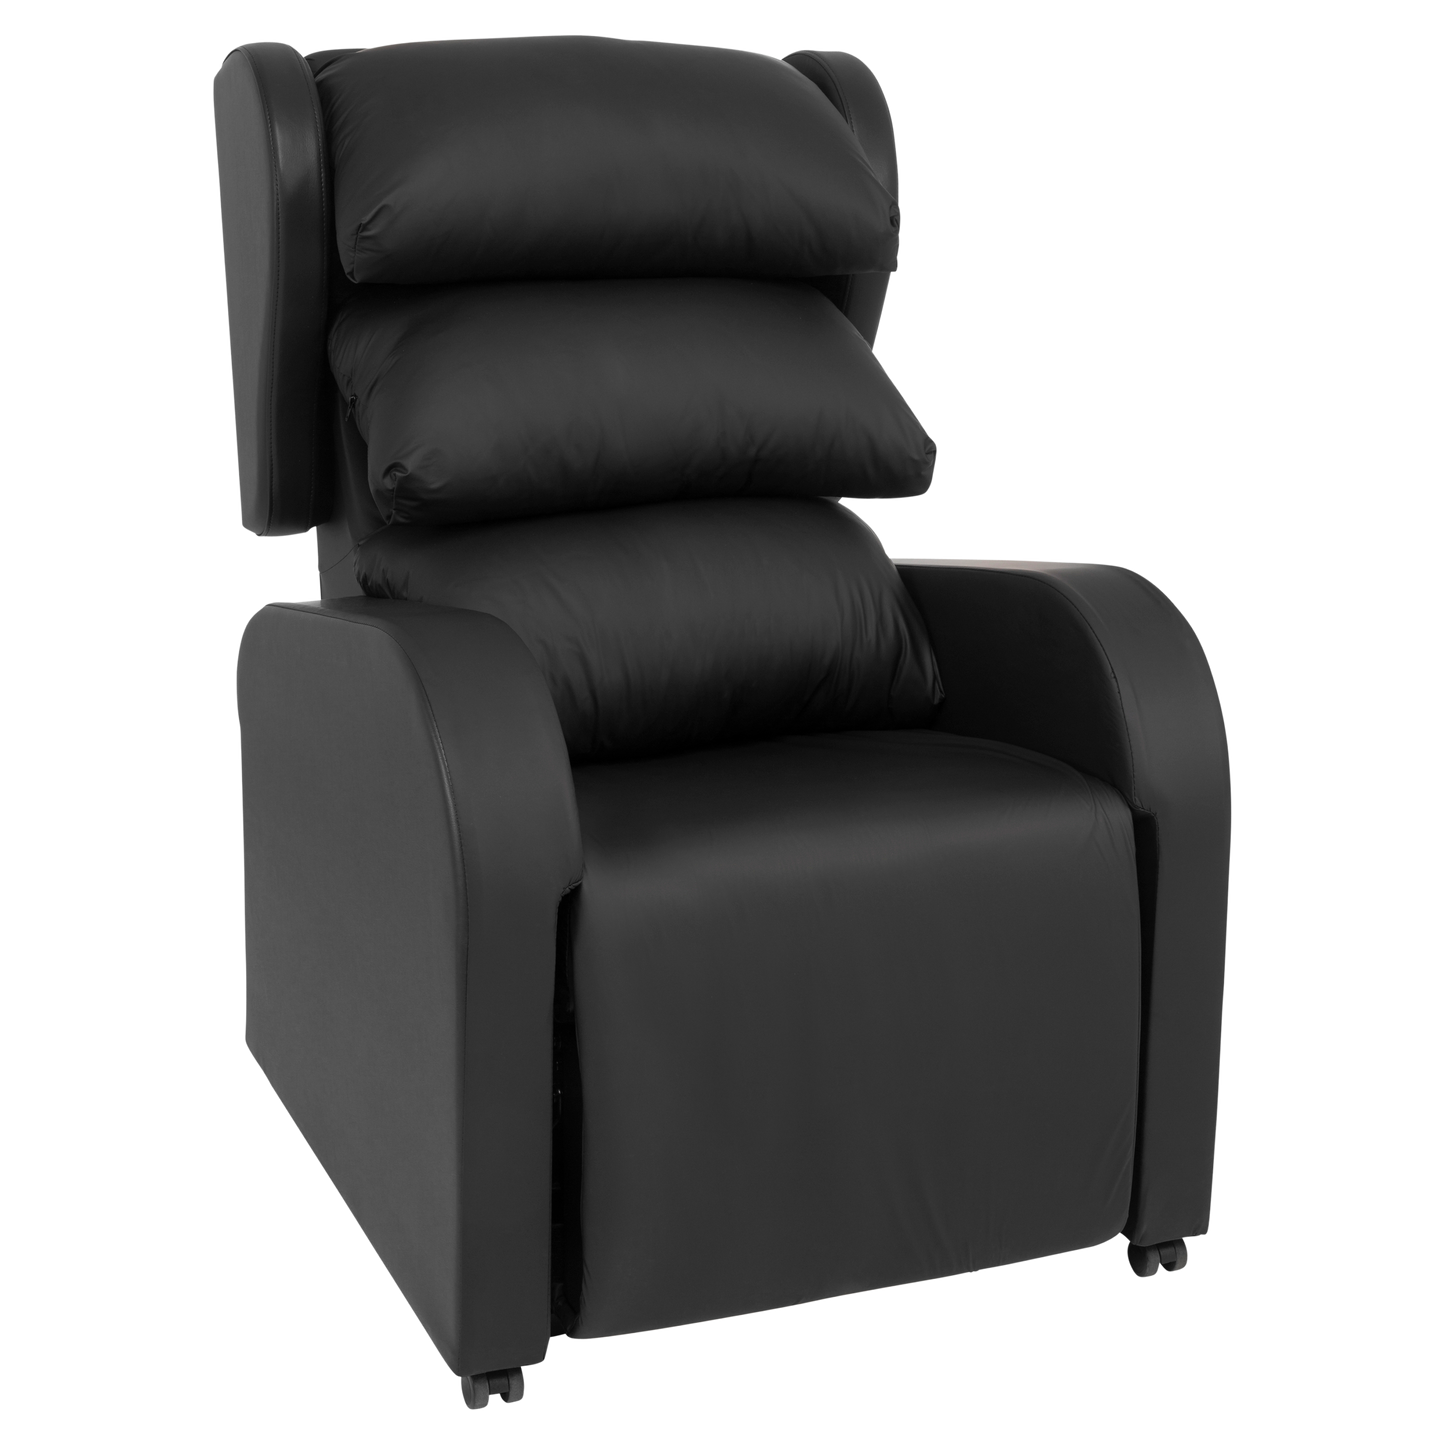 Denver Chair Seat Variable Seat Depth 47.5 - 55cm Seat Height 450mm Waterfall Back Black Width 450mm